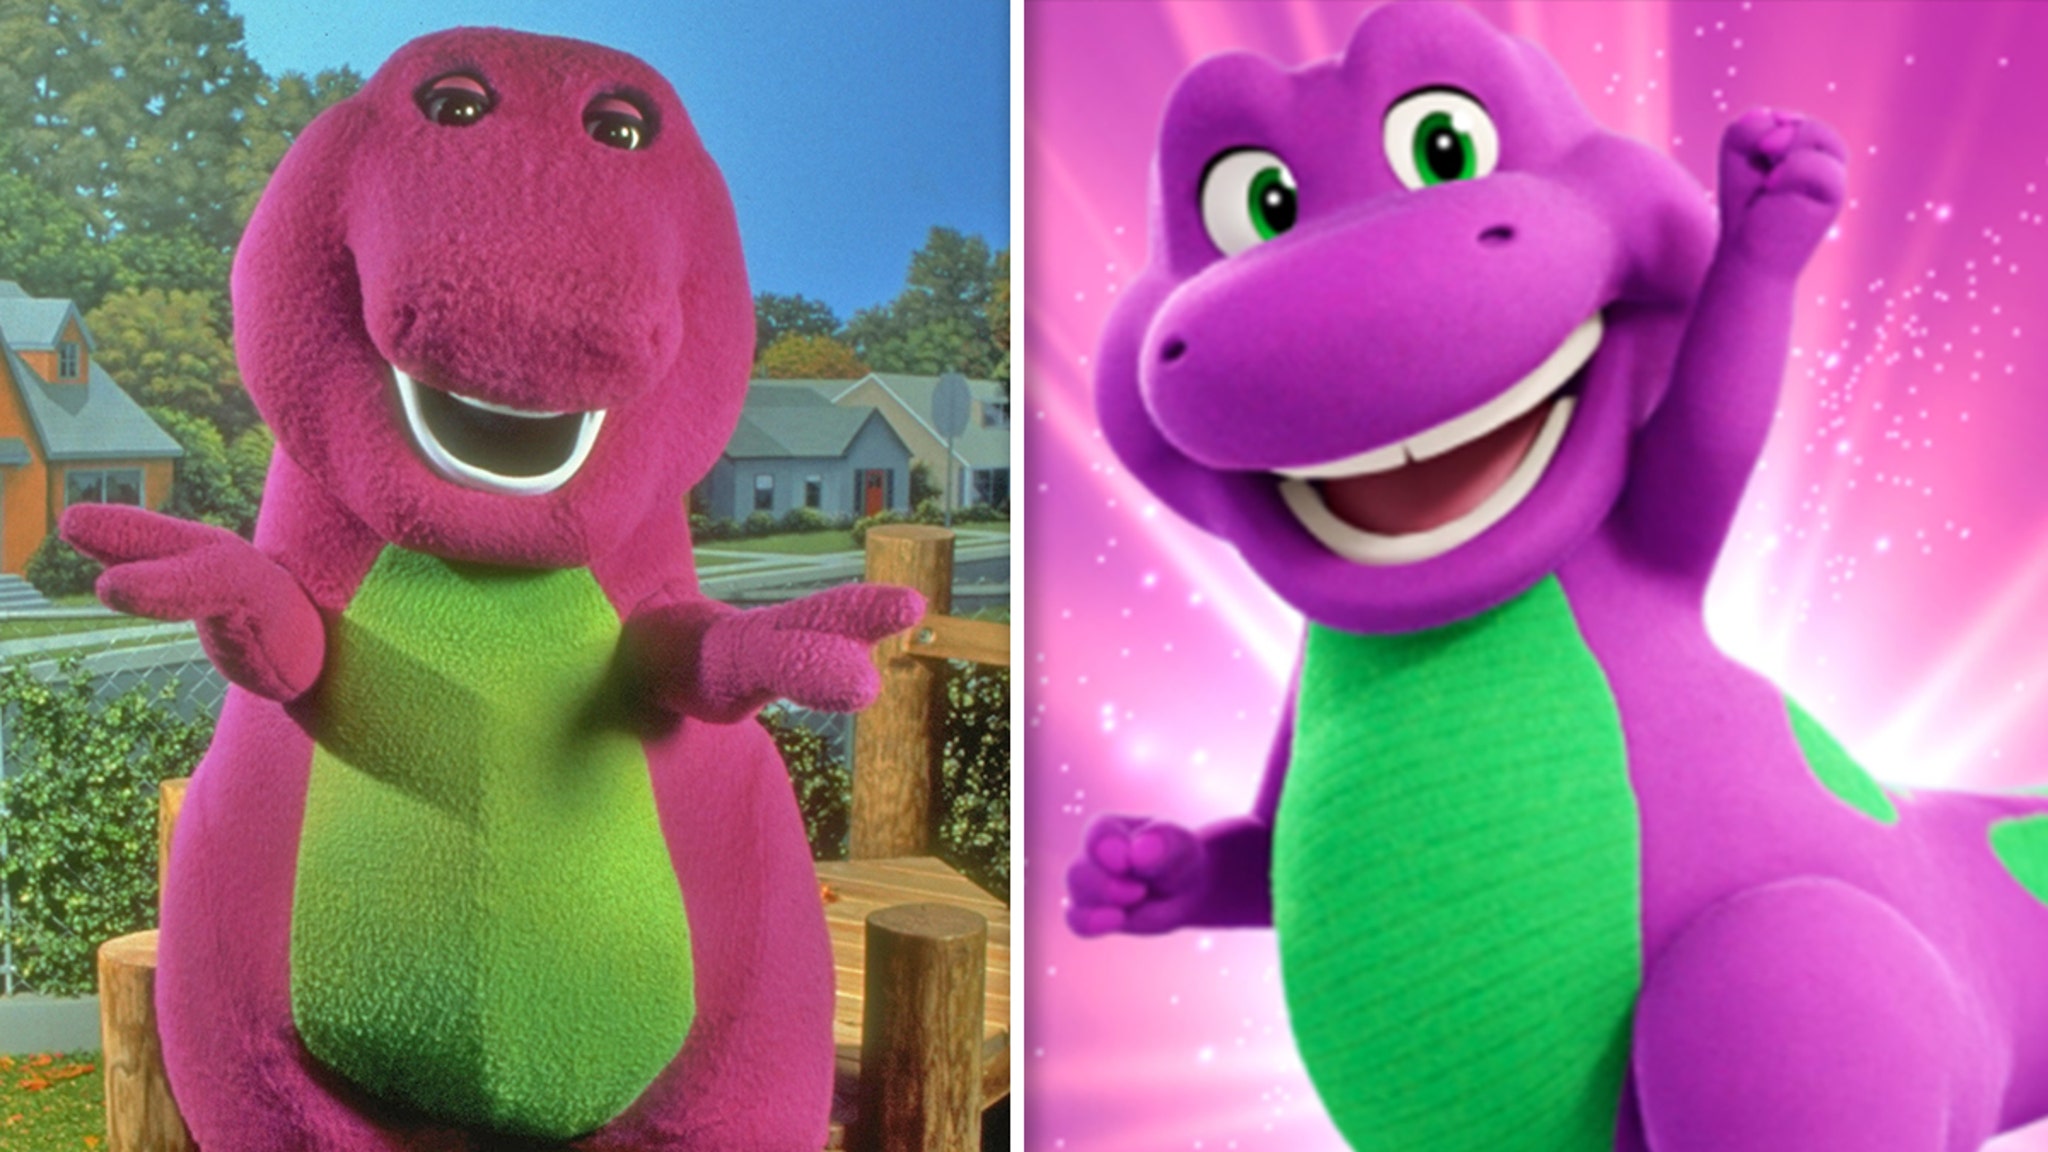 Barney’s Original Voice Actor Bob West Likes the Controversial New Look